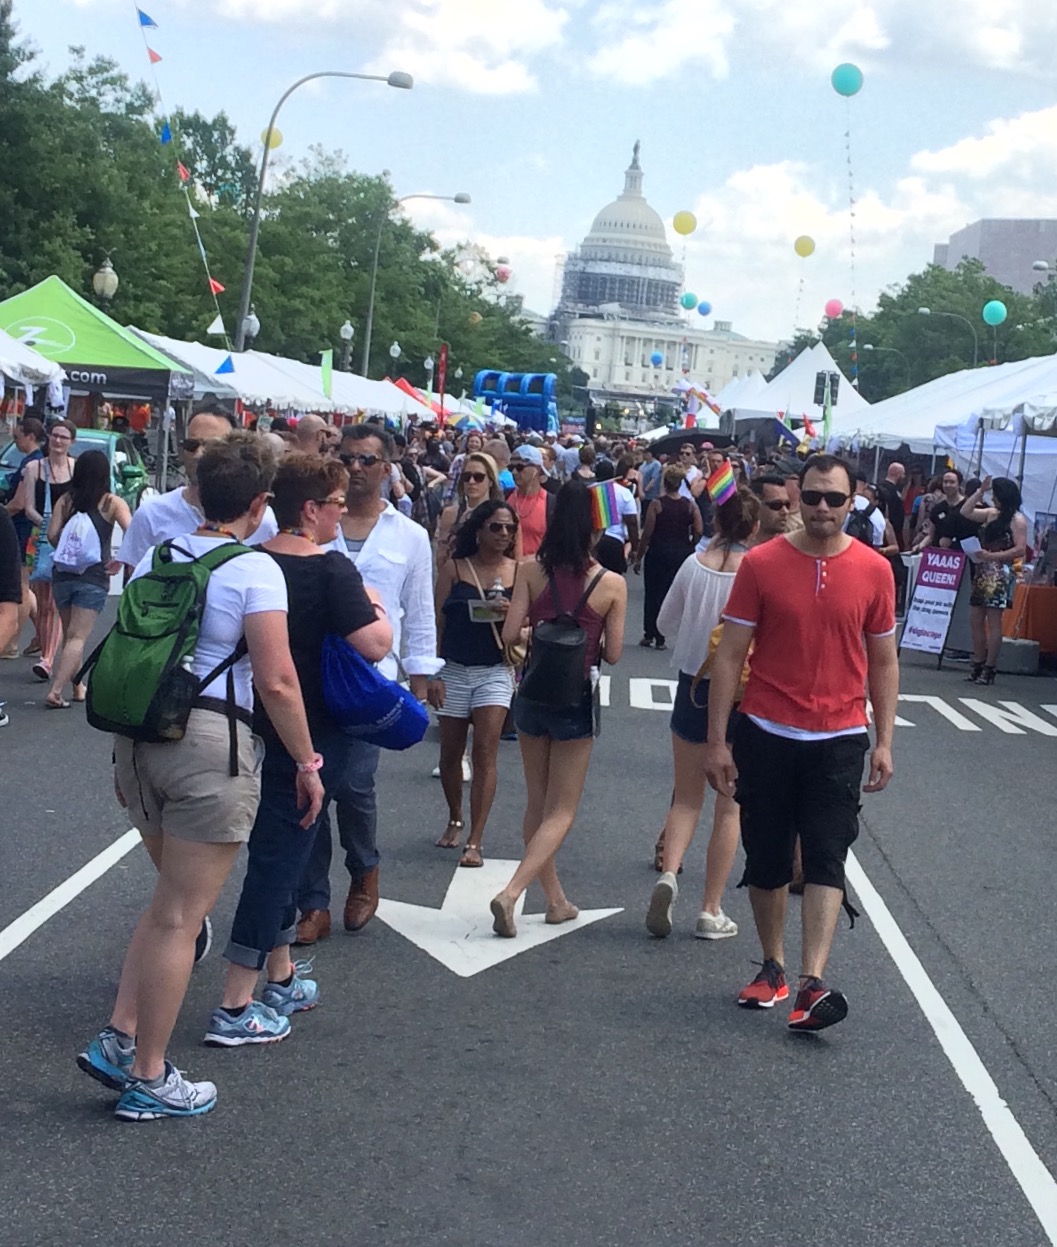 There were still many attendants at the Capital Pride Festival on Pennsylvania Avenue in D.C. (WTOP/Dick Uliano)